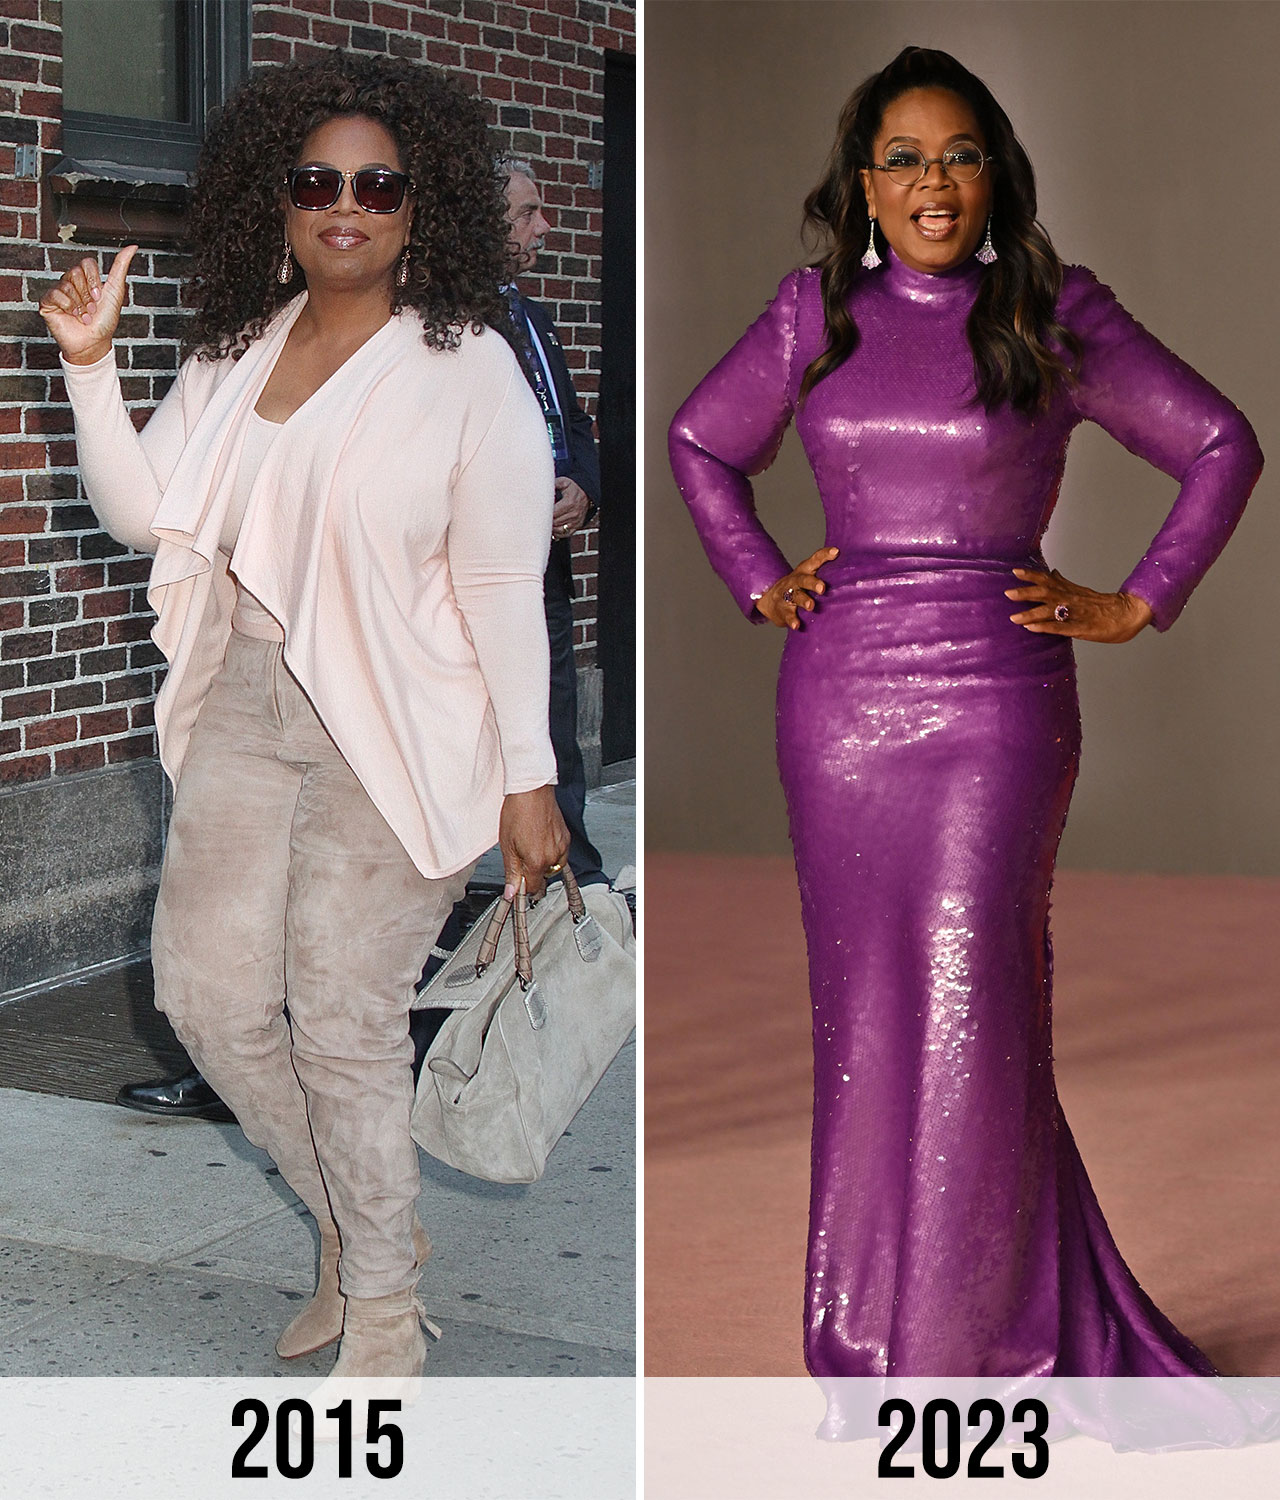 Oprah Winfrey before and after weight loss transformation